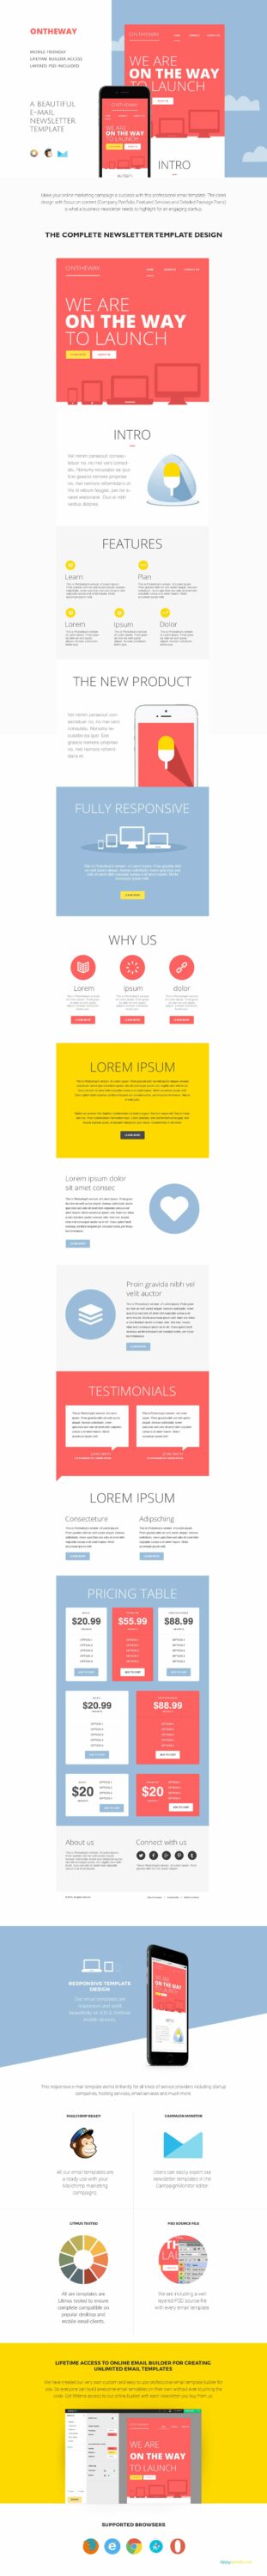 Image of adorable email design template.